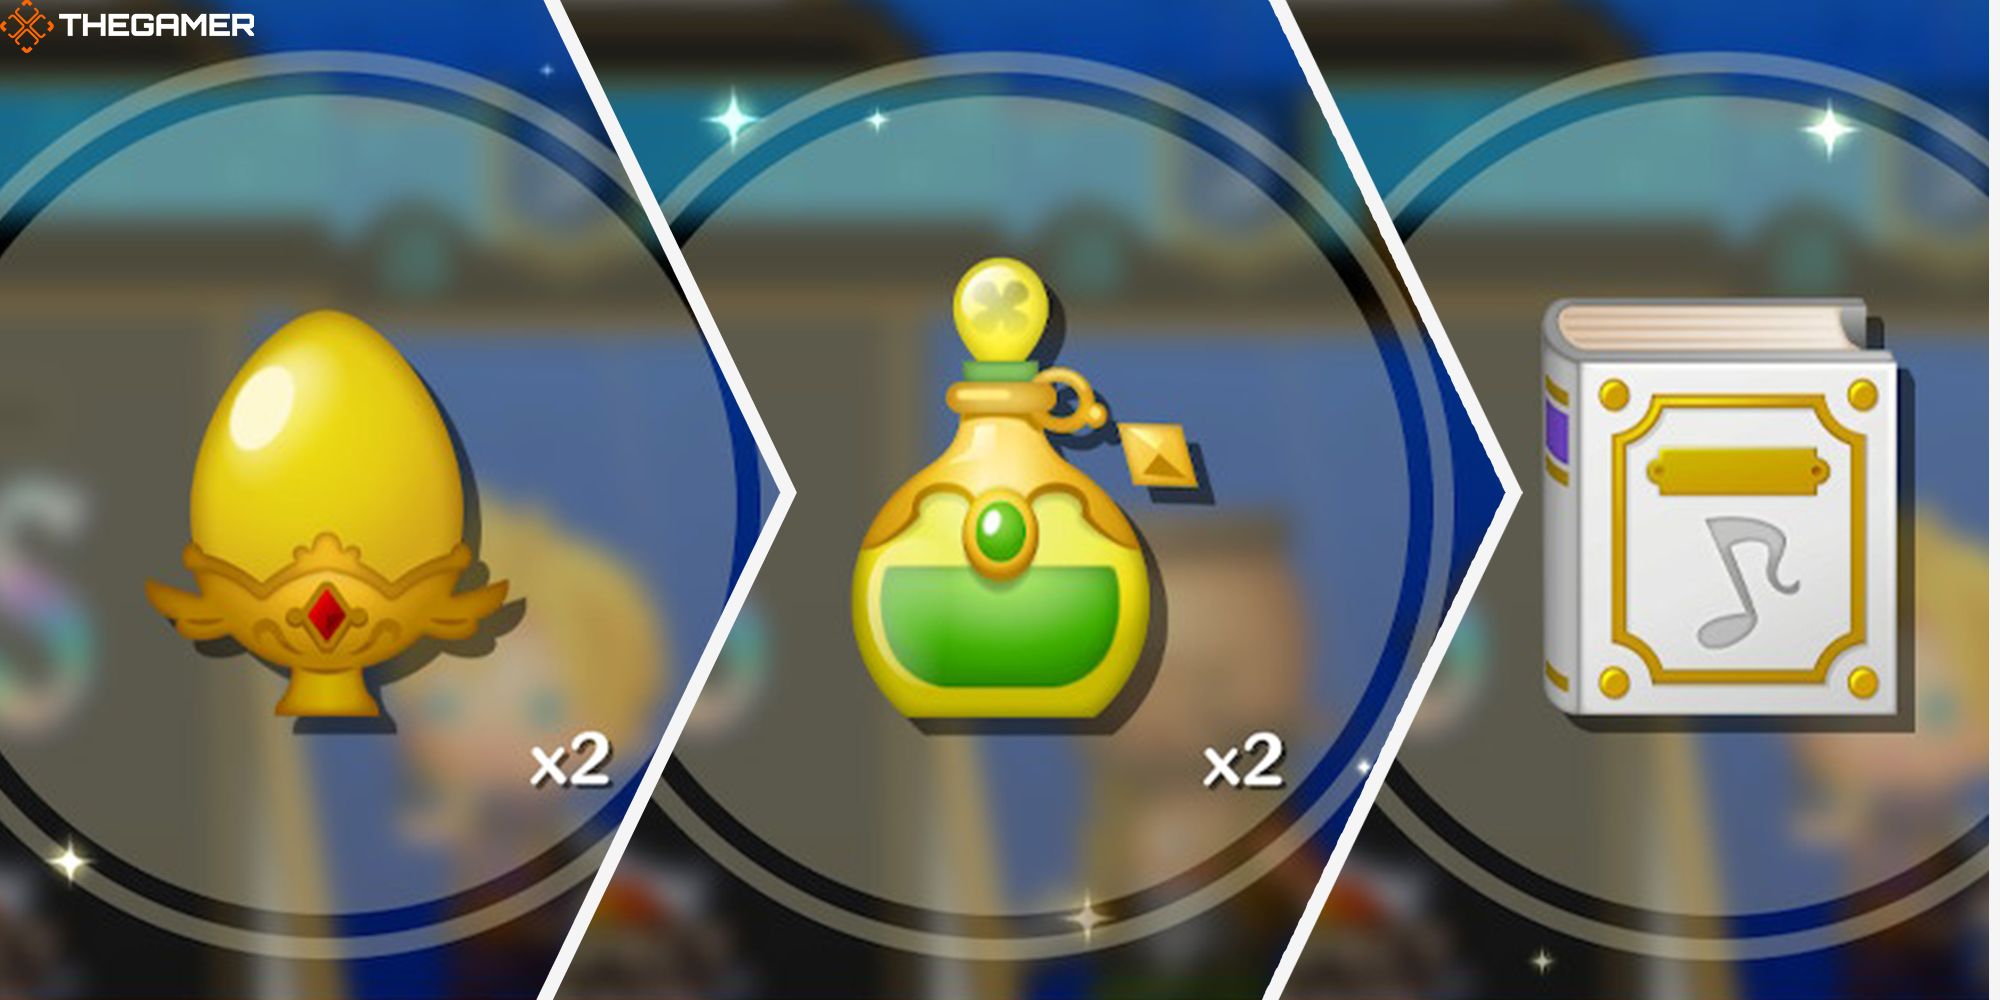 A Gold Growth Egg, Luck Plus Power-Up, and Ruin Scroll from Theatrhythm: Final Bar Line.